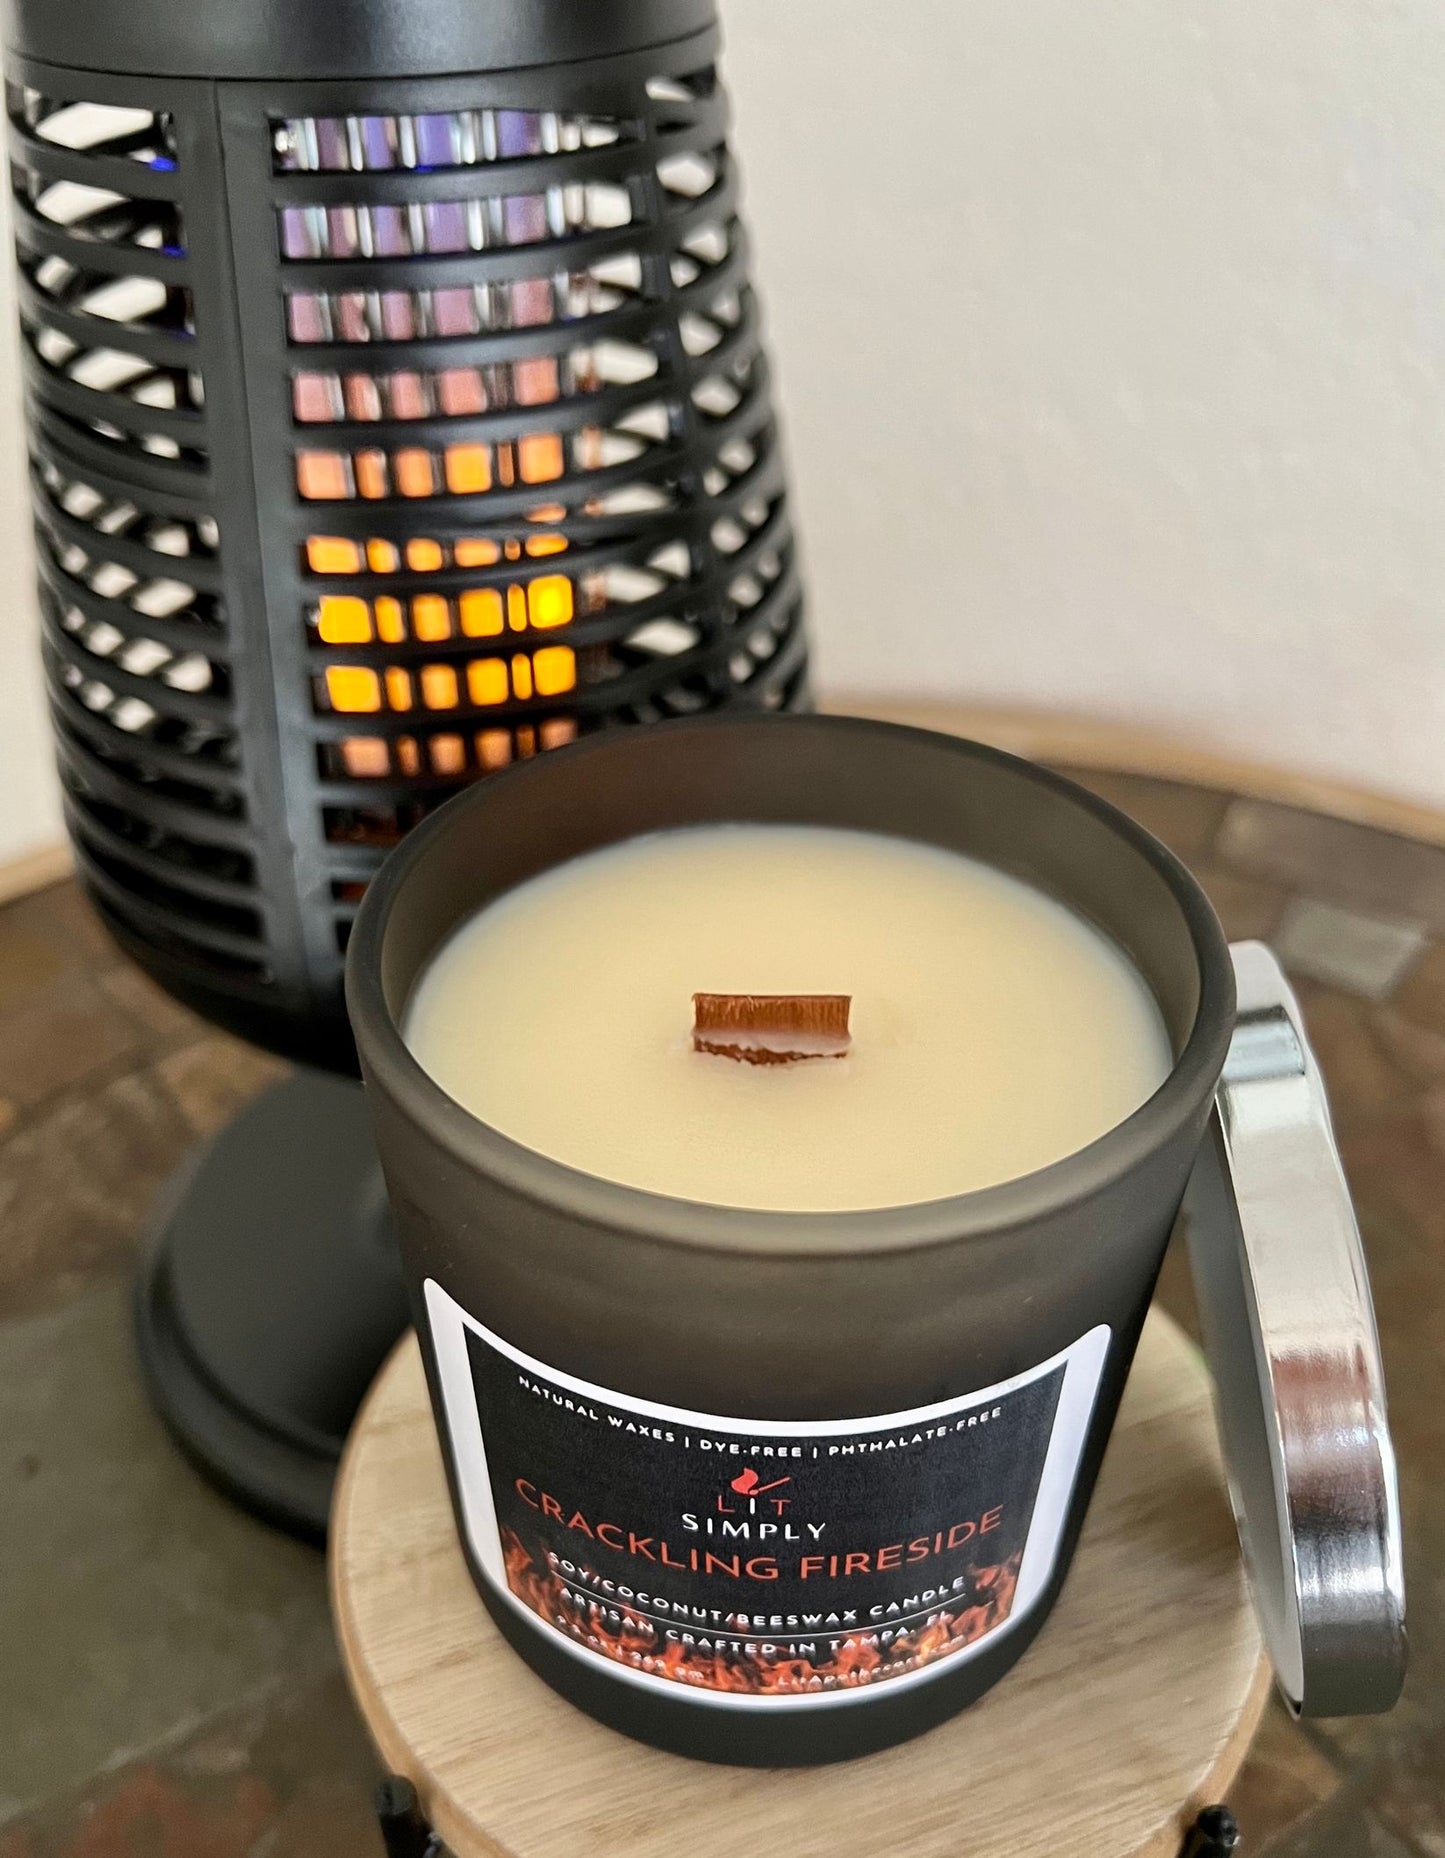 Crackling Fireside Candle – LIT Simply Luxury Candle Wooden Wick